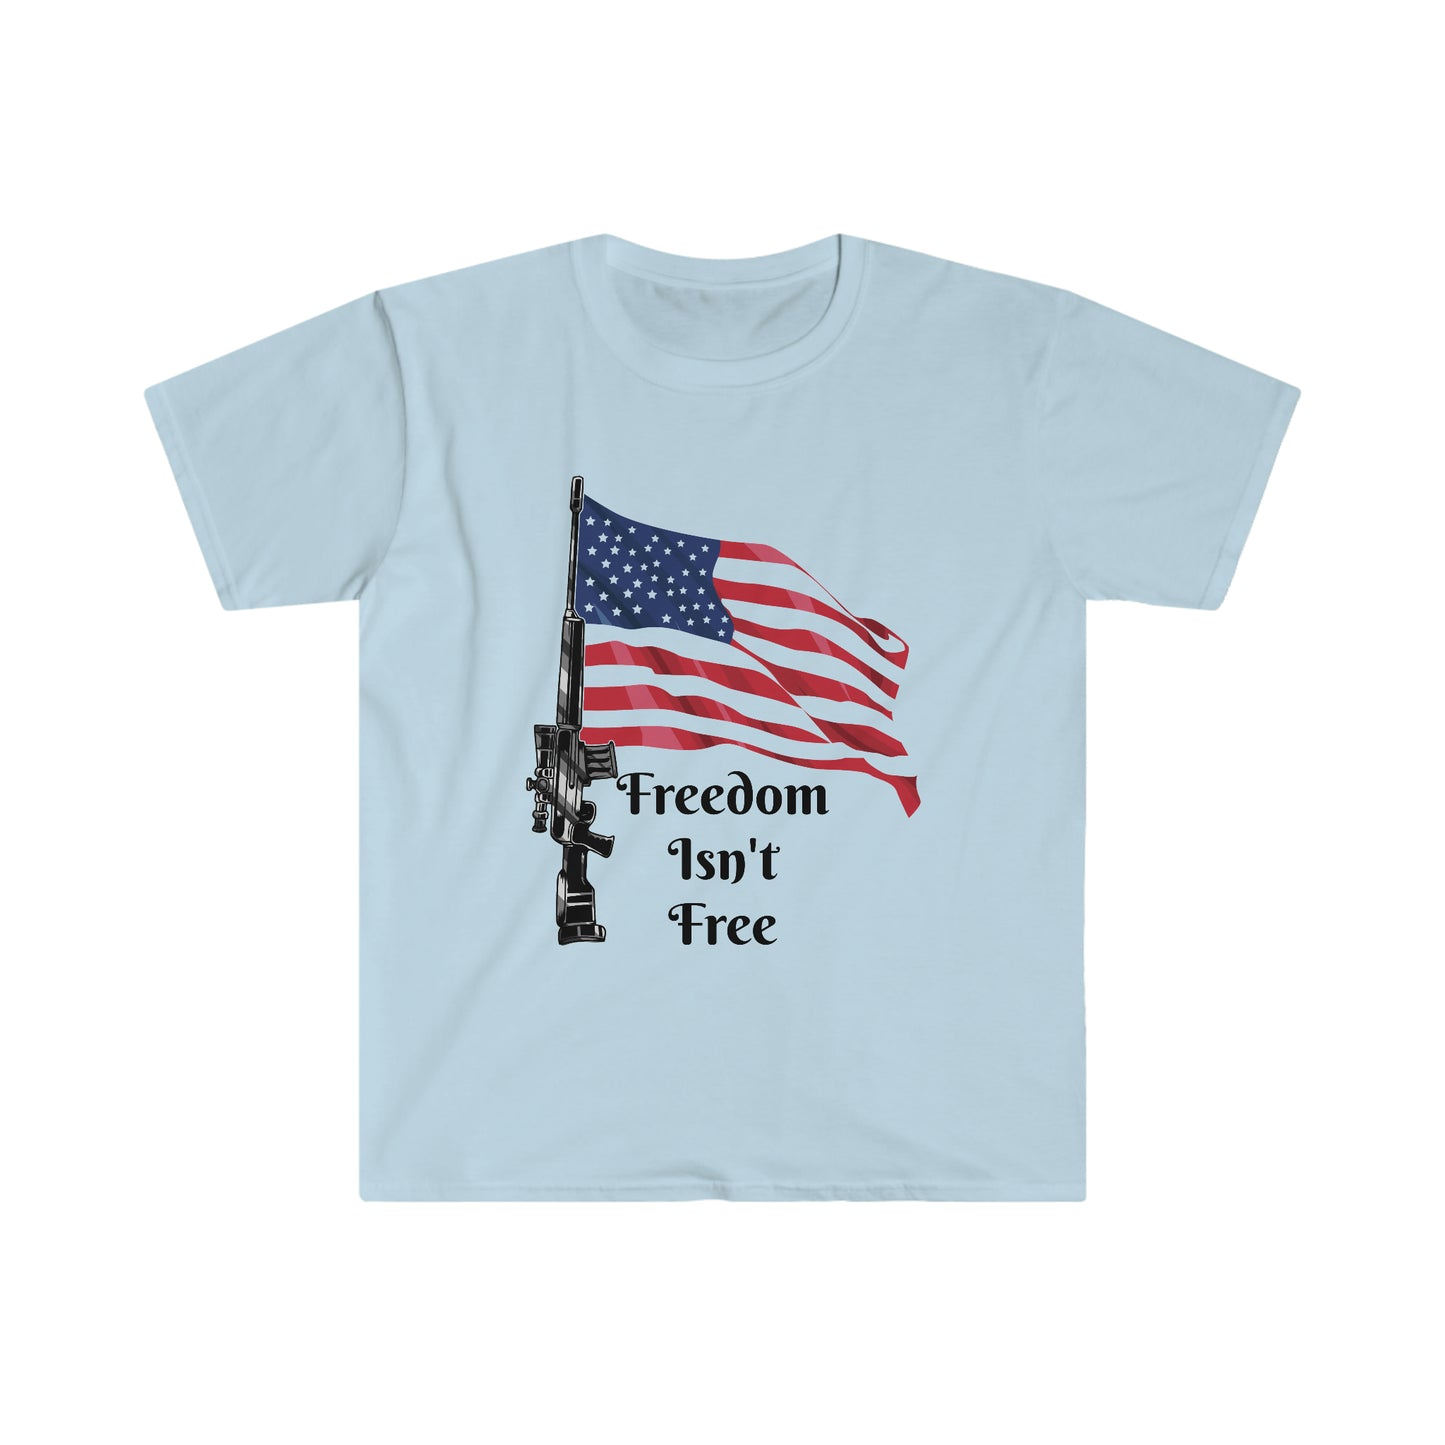 Unisex Softstyle T-Shirt Patriot Collection freedom isn't free on light